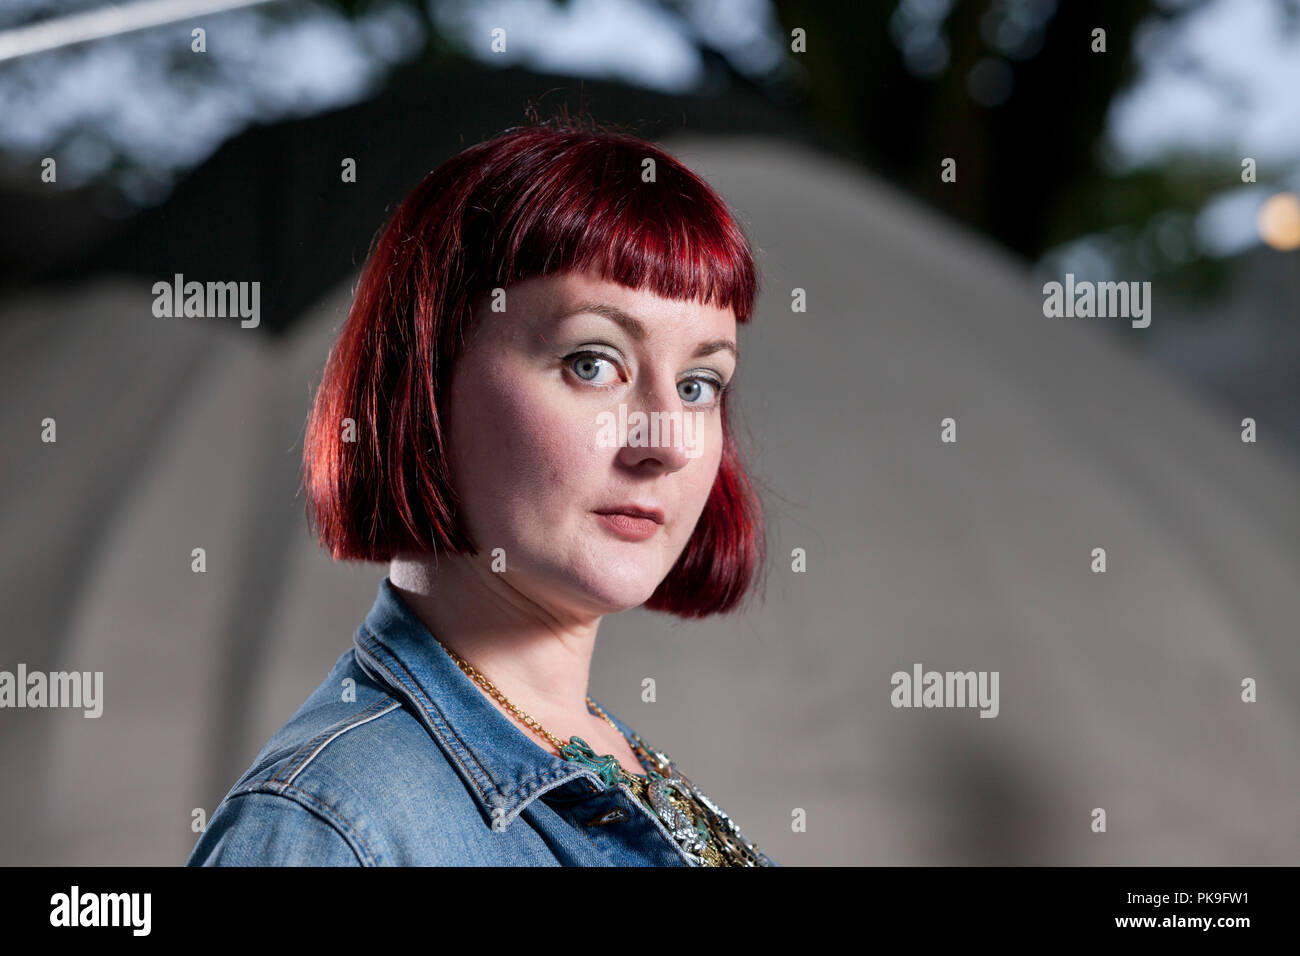 Kirsty Logan is a Scottish novelist, poet, performer, literary editor, writing mentor, book reviewer and writer of short fiction. Pictured at the Edinburgh International Book Festival. Edinburgh, Scotland.  Picture by Gary Doak / Alamy Stock Photo